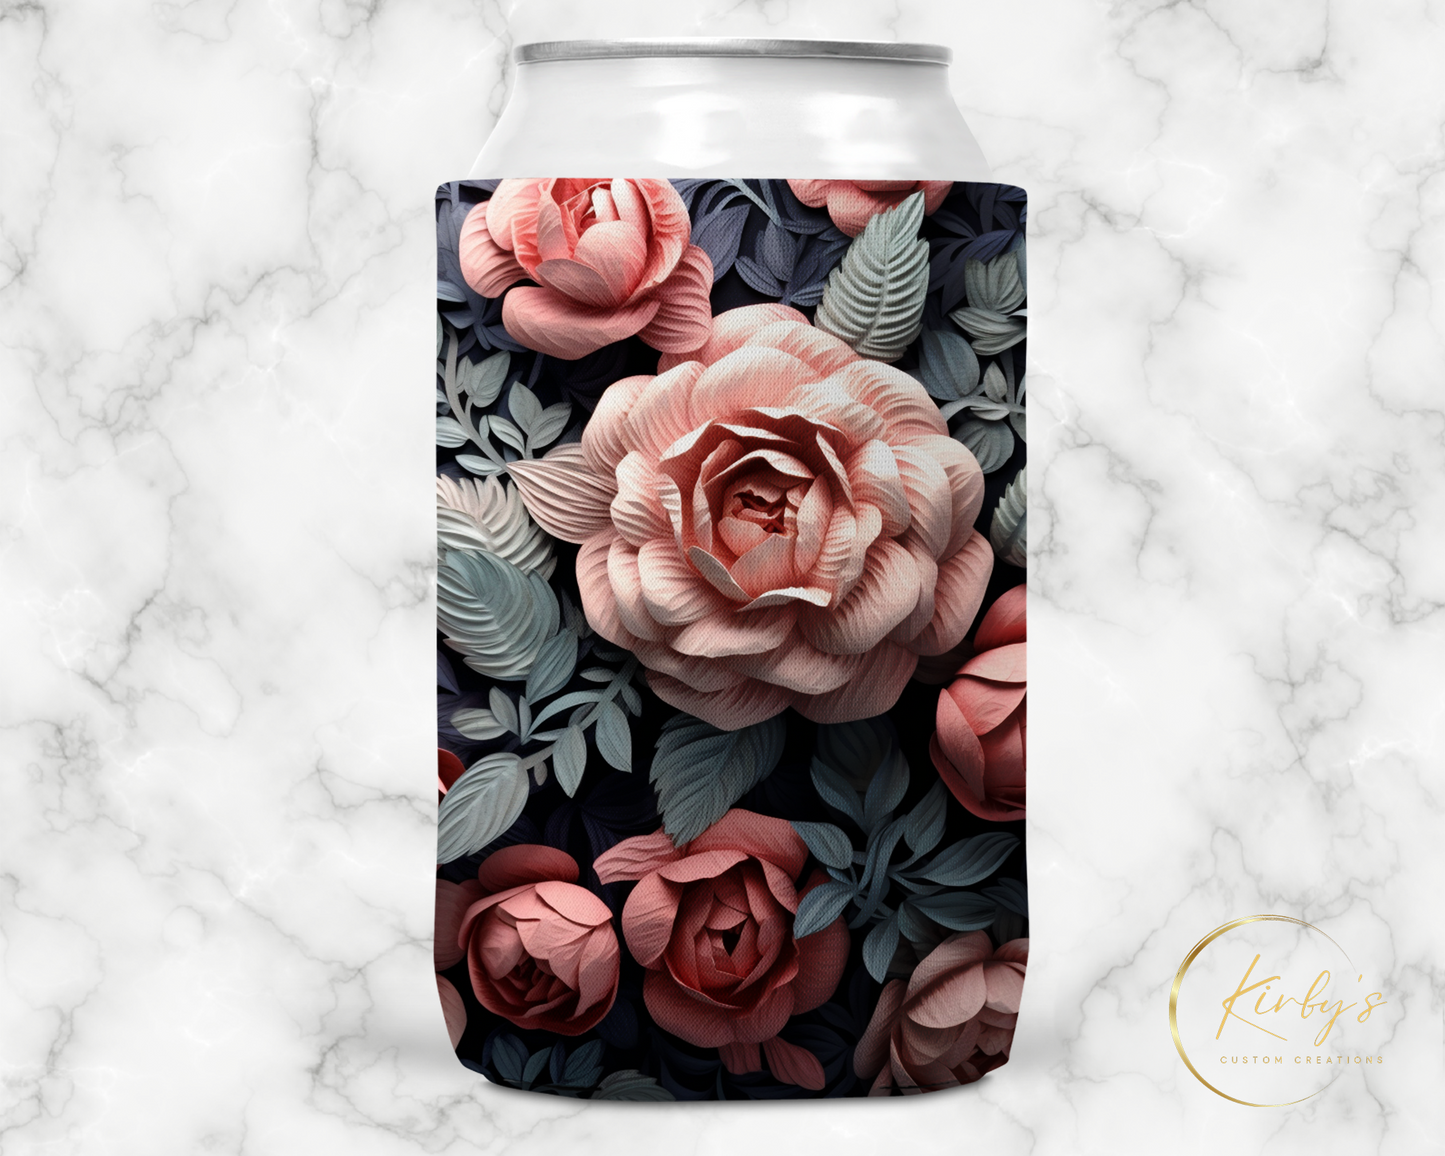 3D Floral Can Holder. Blue and PinkFlowers. Standard Soft Koozie